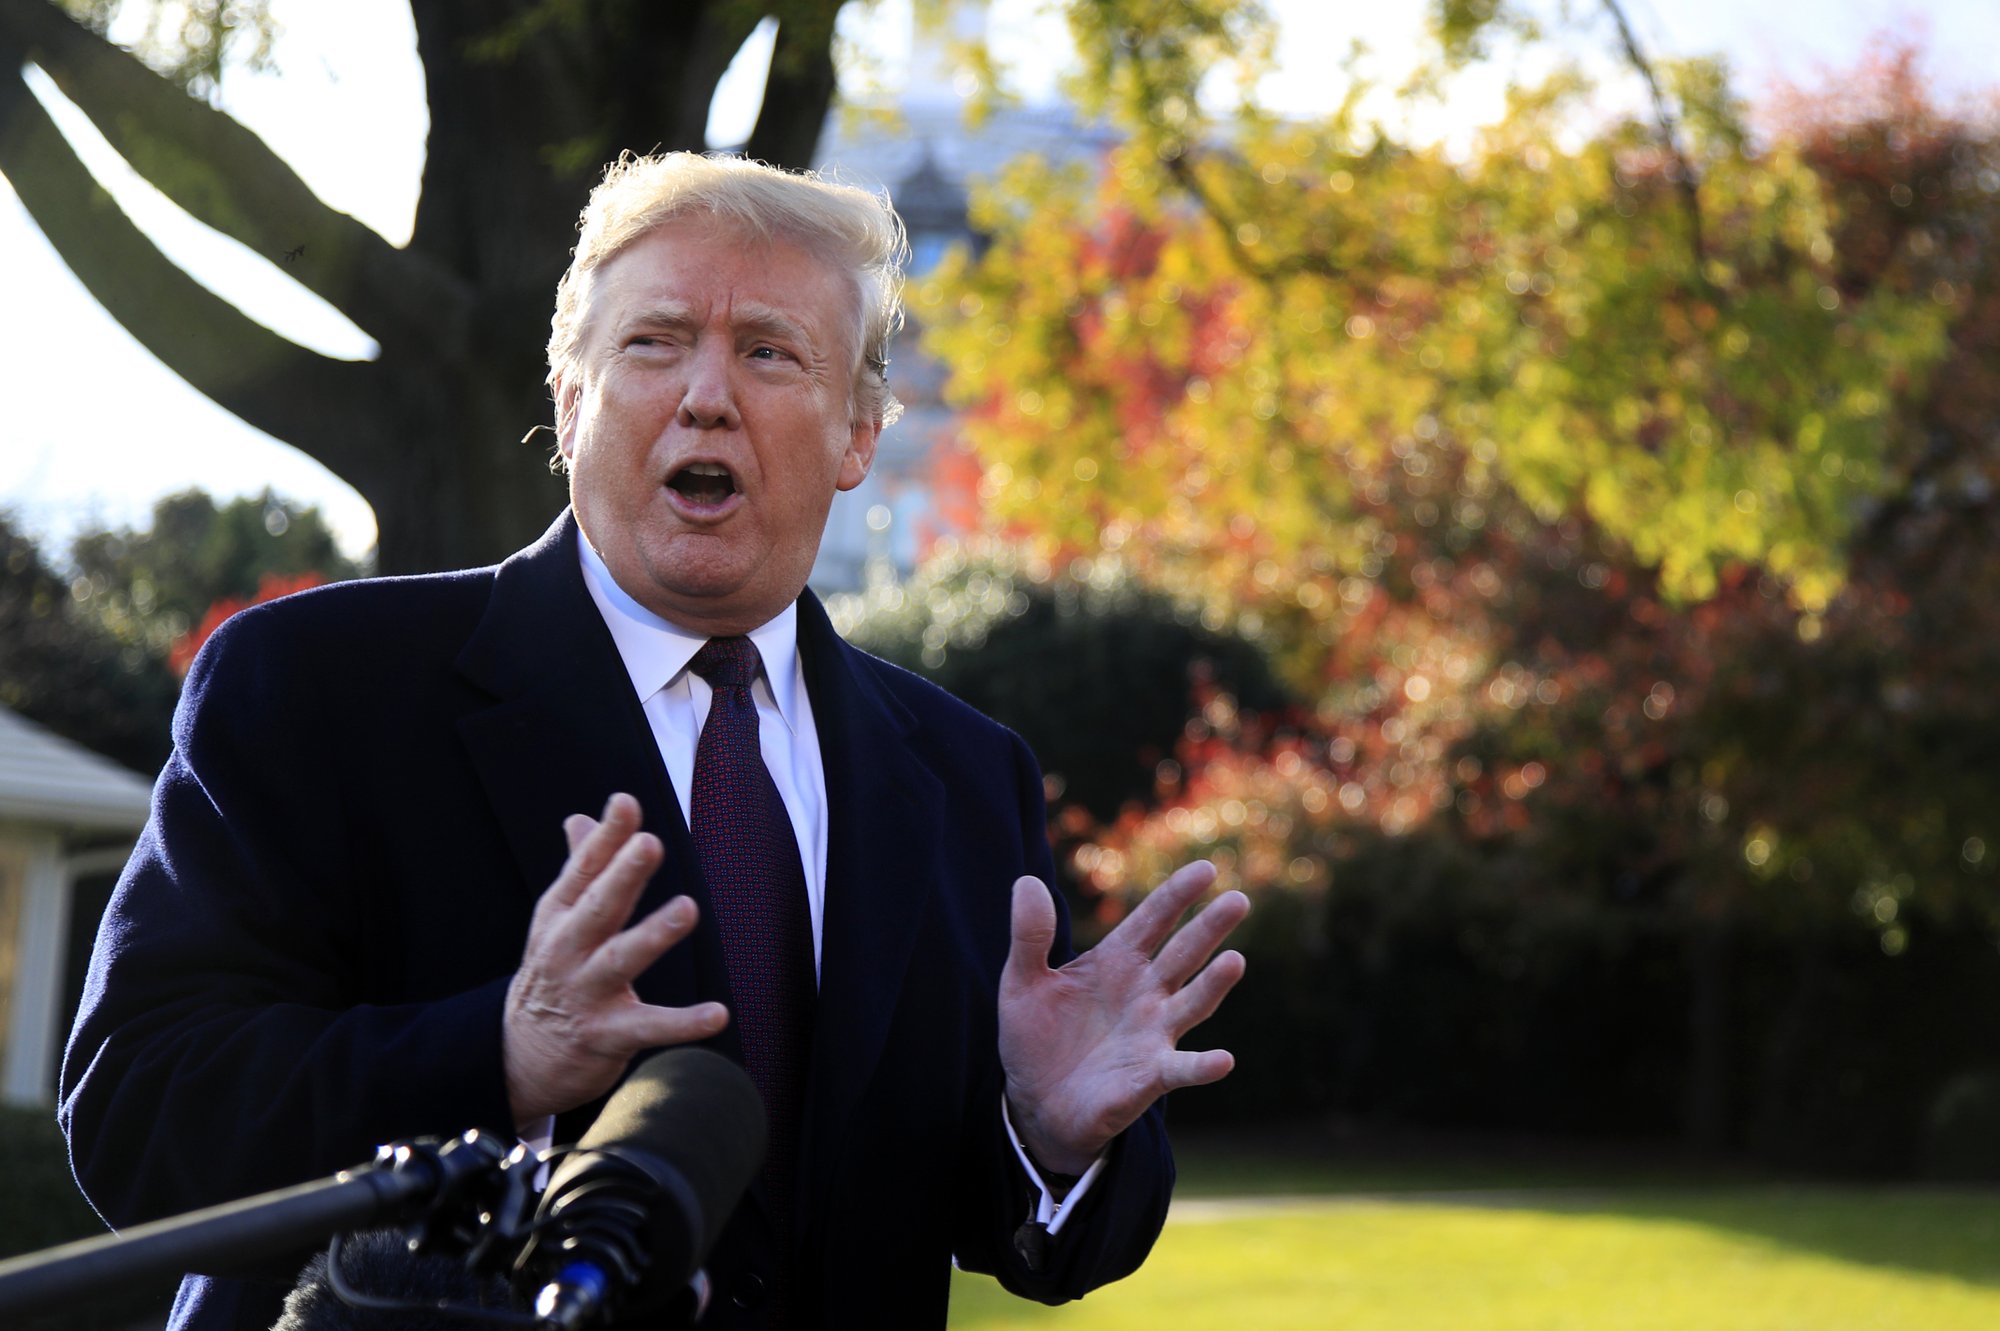 President Donald Trump speaks to the media before leaving the White House in Washington, on Tuesday, Nov. 20, 2018, to travel to Florida, where he will spend Thanksgiving at Mar-a-Lago. Photo: AP